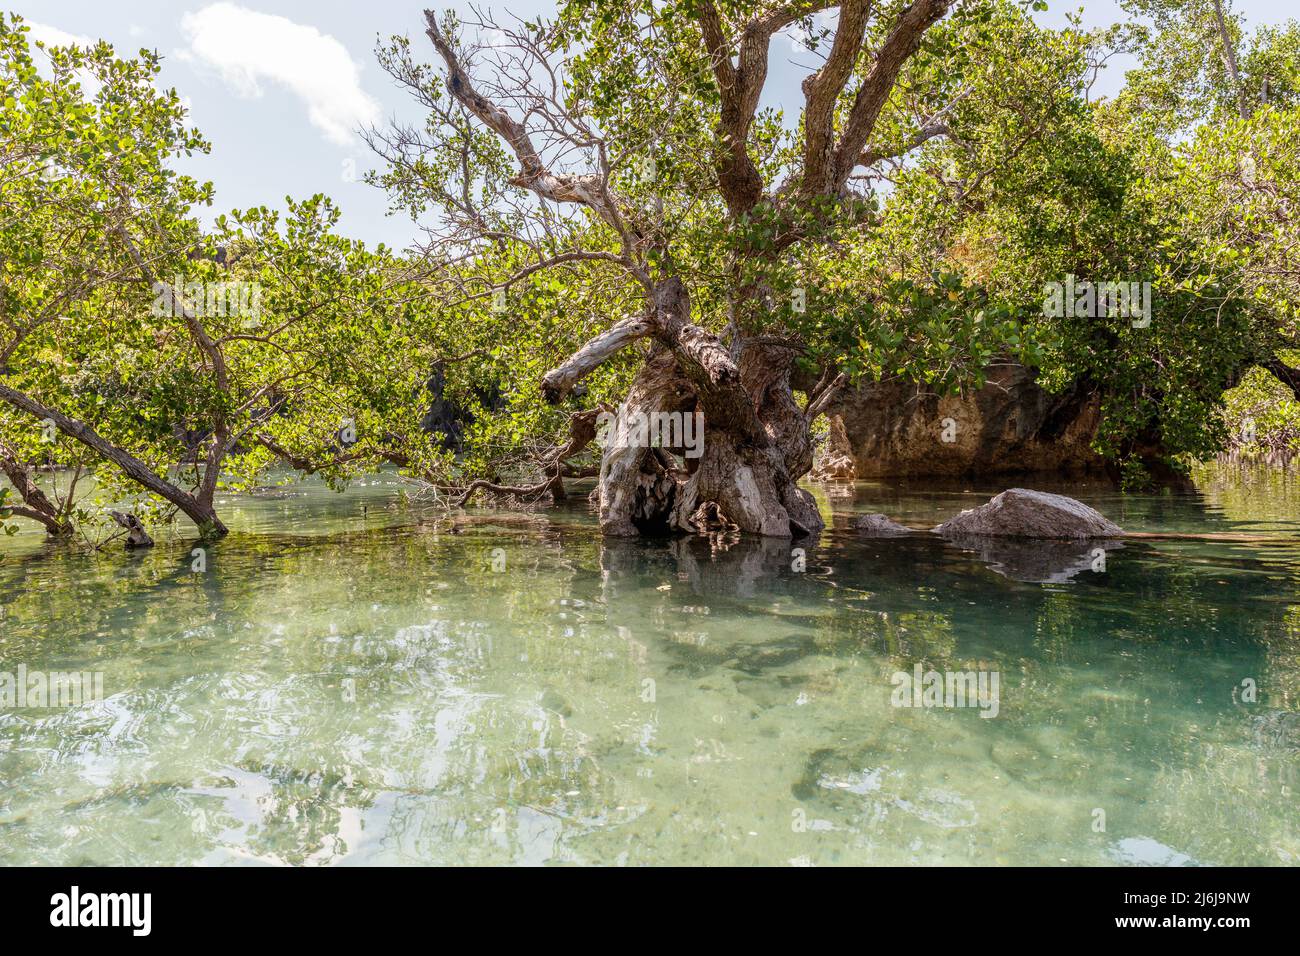 Mangrove forest in Rote Island, East Nusa Tenggara province, Indonesia Stock Photo